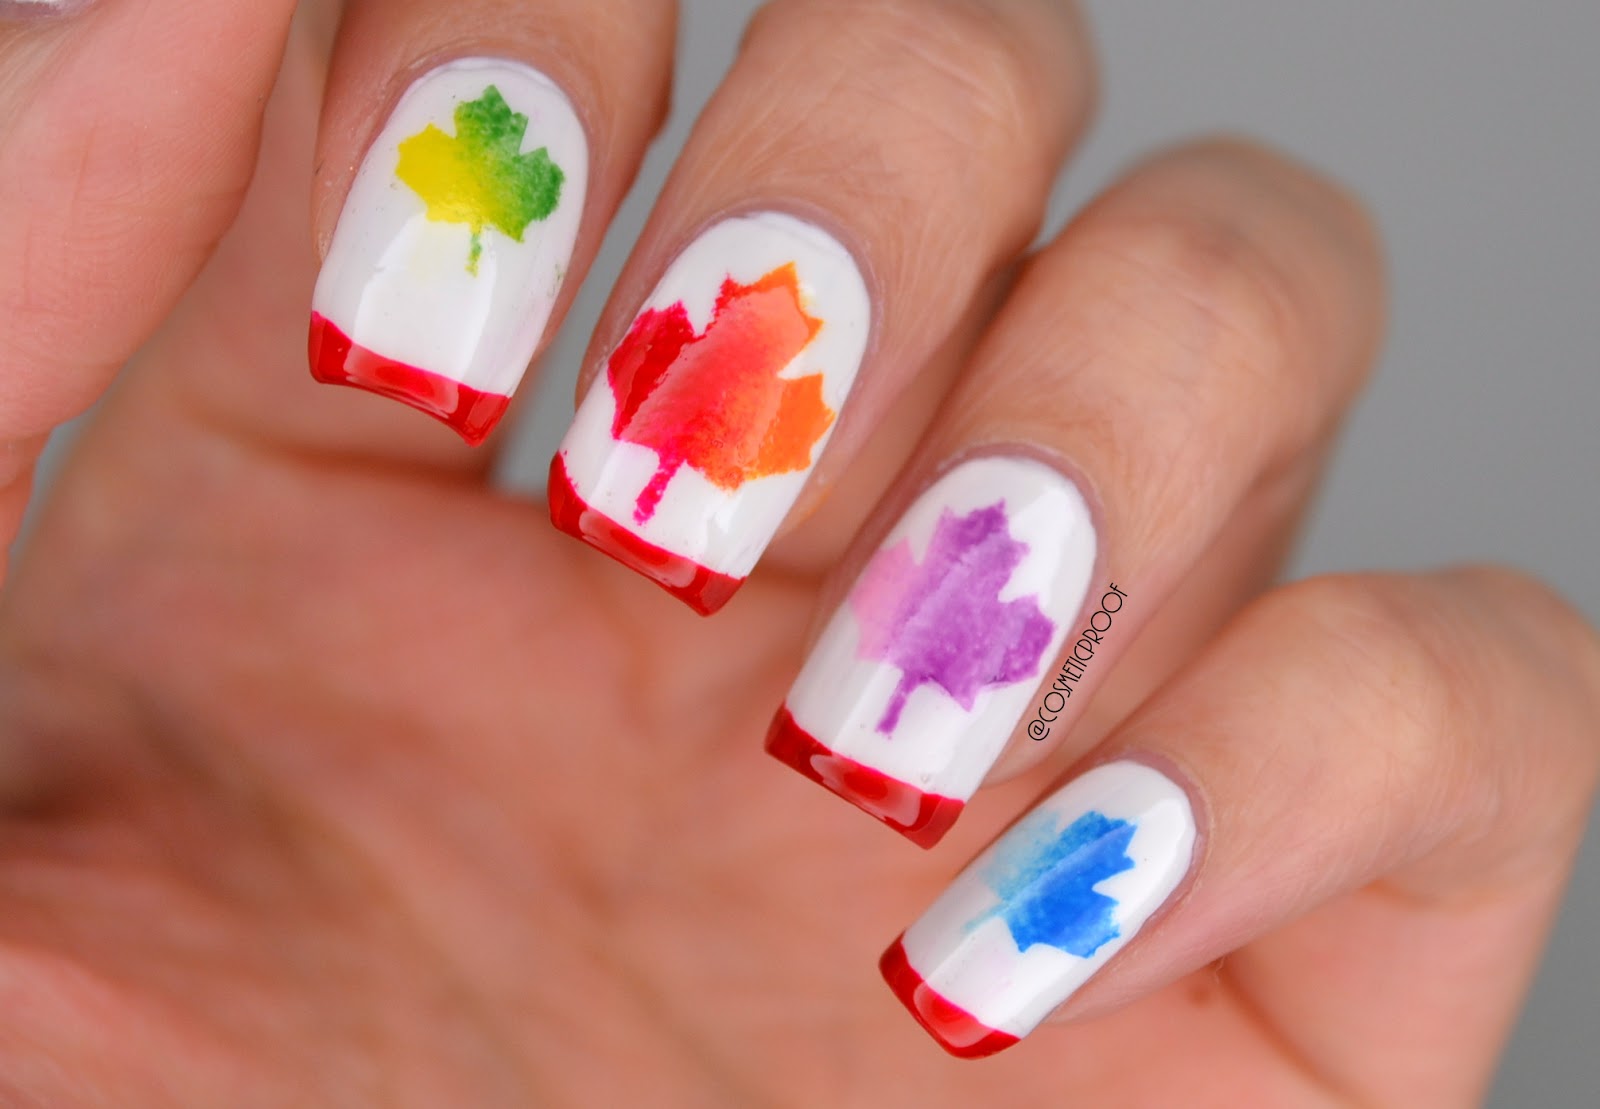 2. How to Create a Pot Leaf Nail Design - wide 9